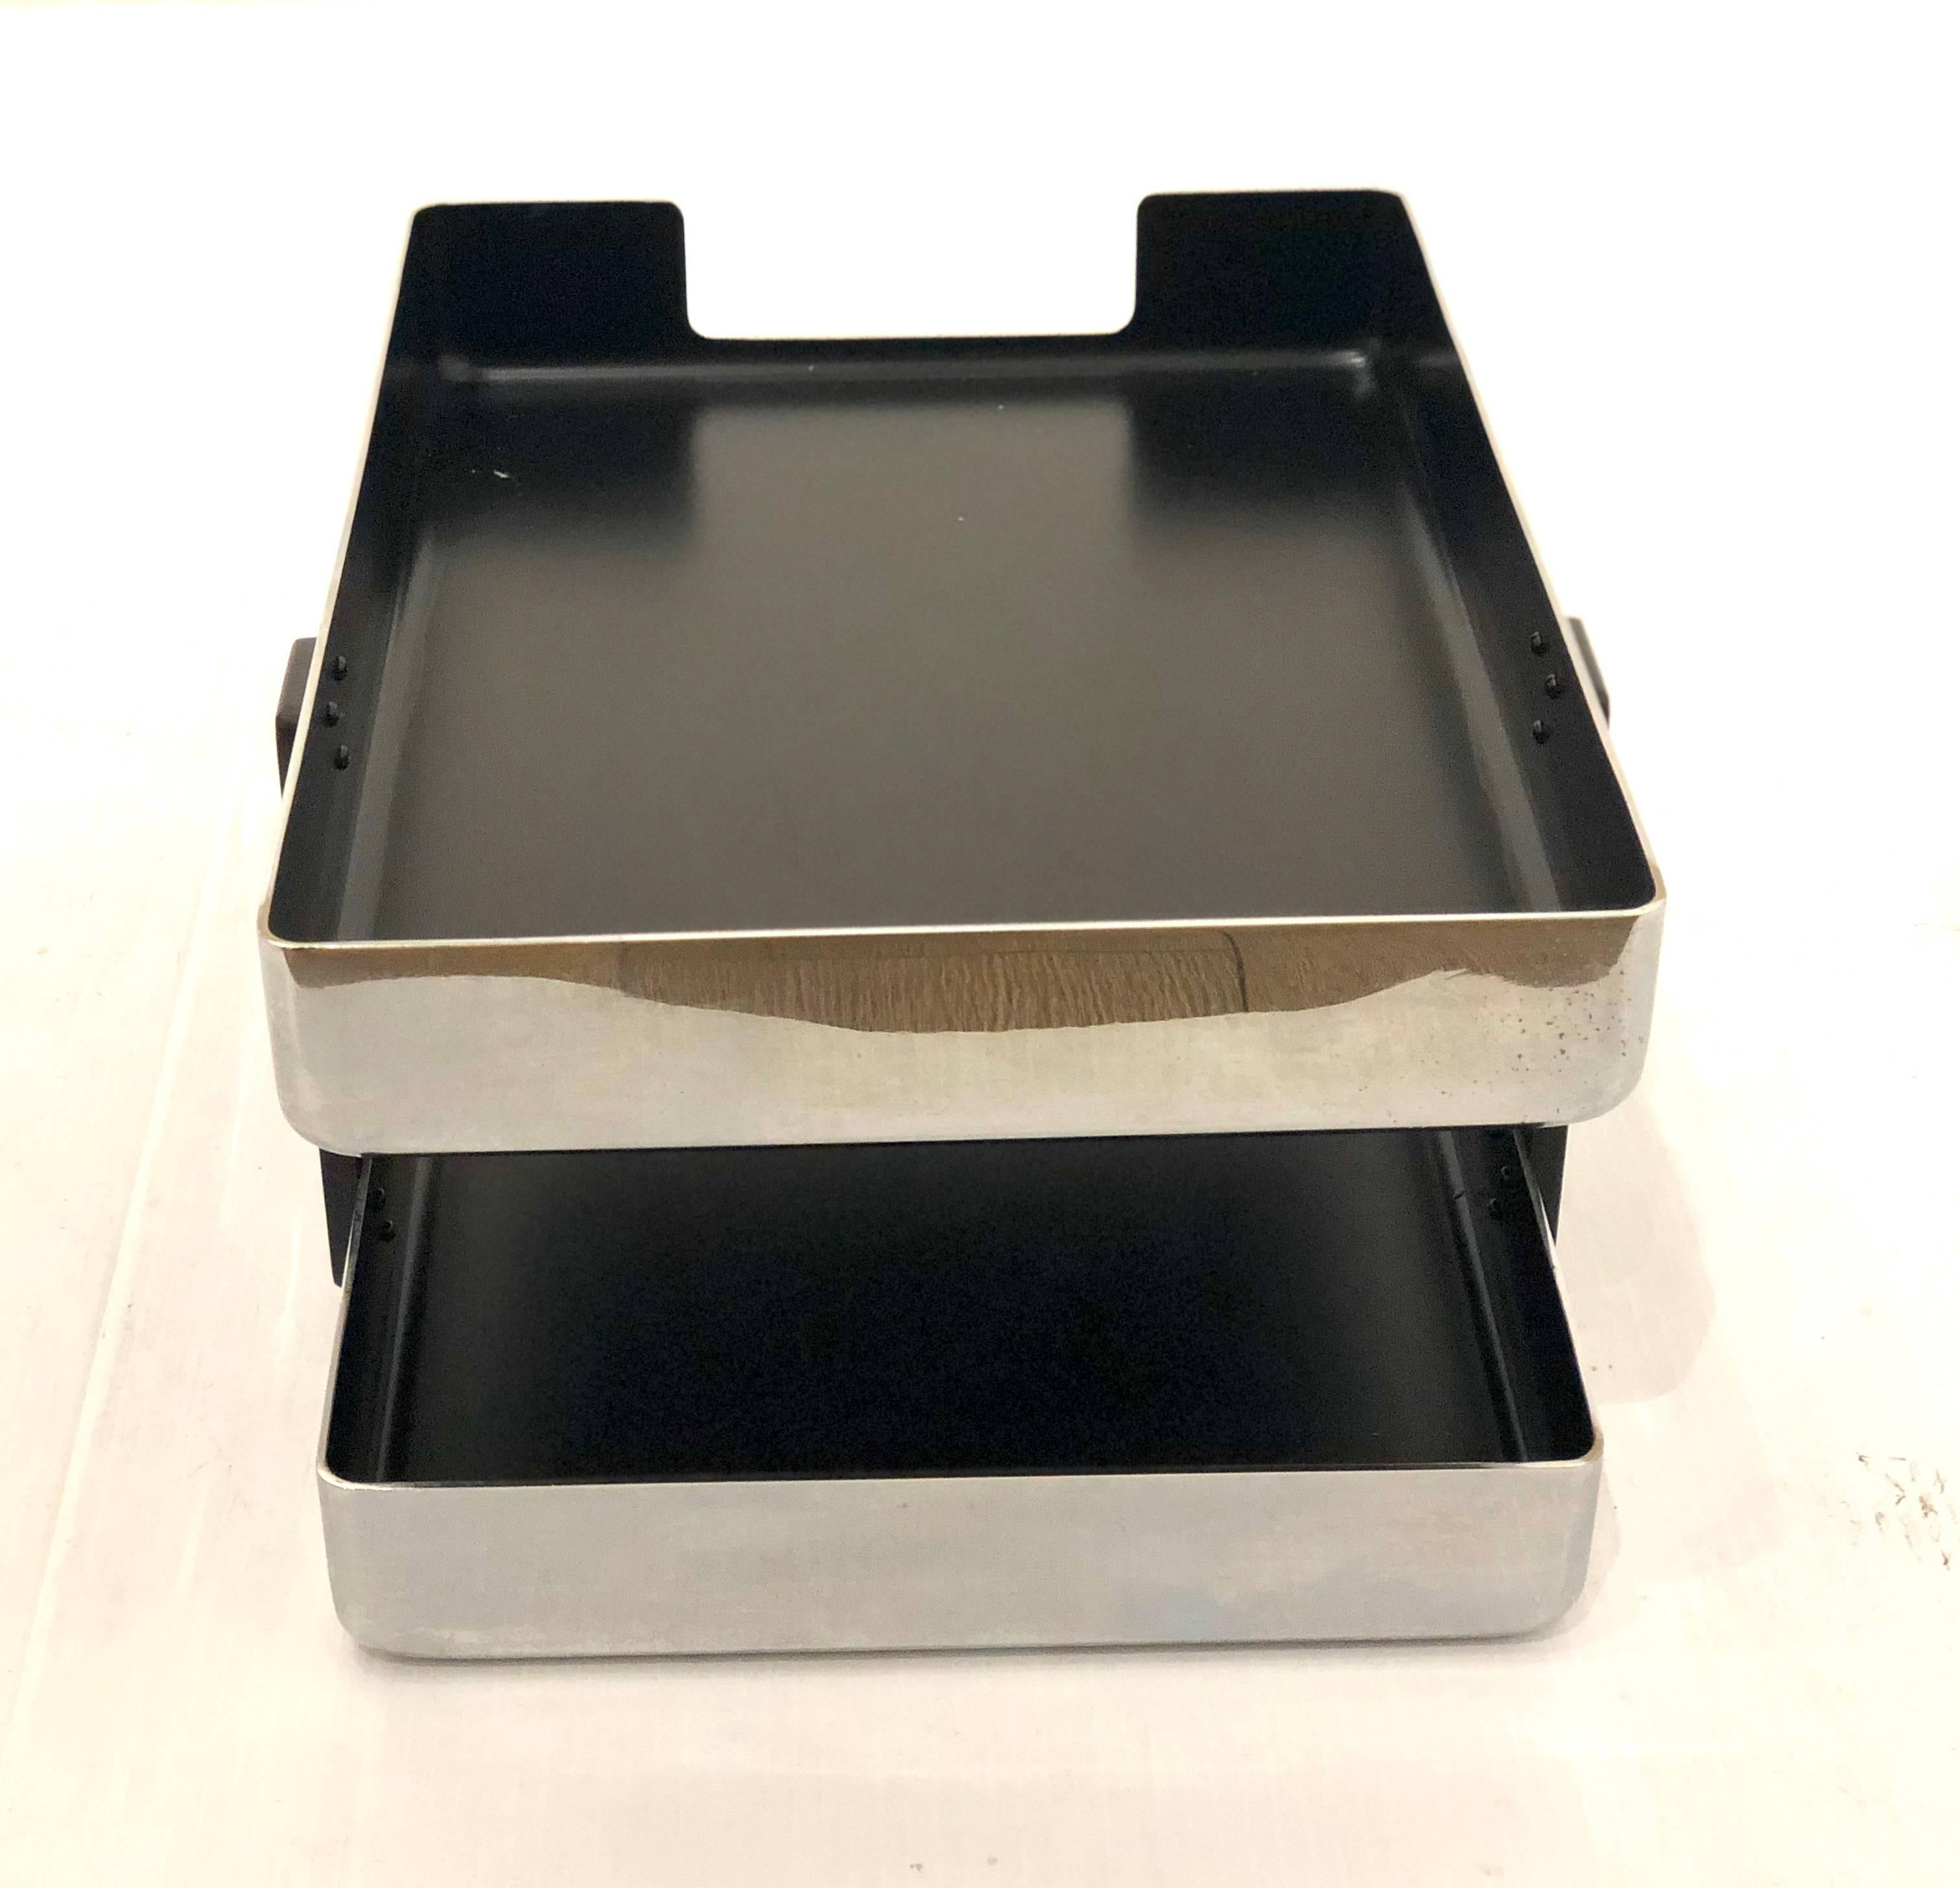 Double letter tray in polished aluminium finish with black enamel lining by Metcor. Very nice accent to any executives desk! California design.
  